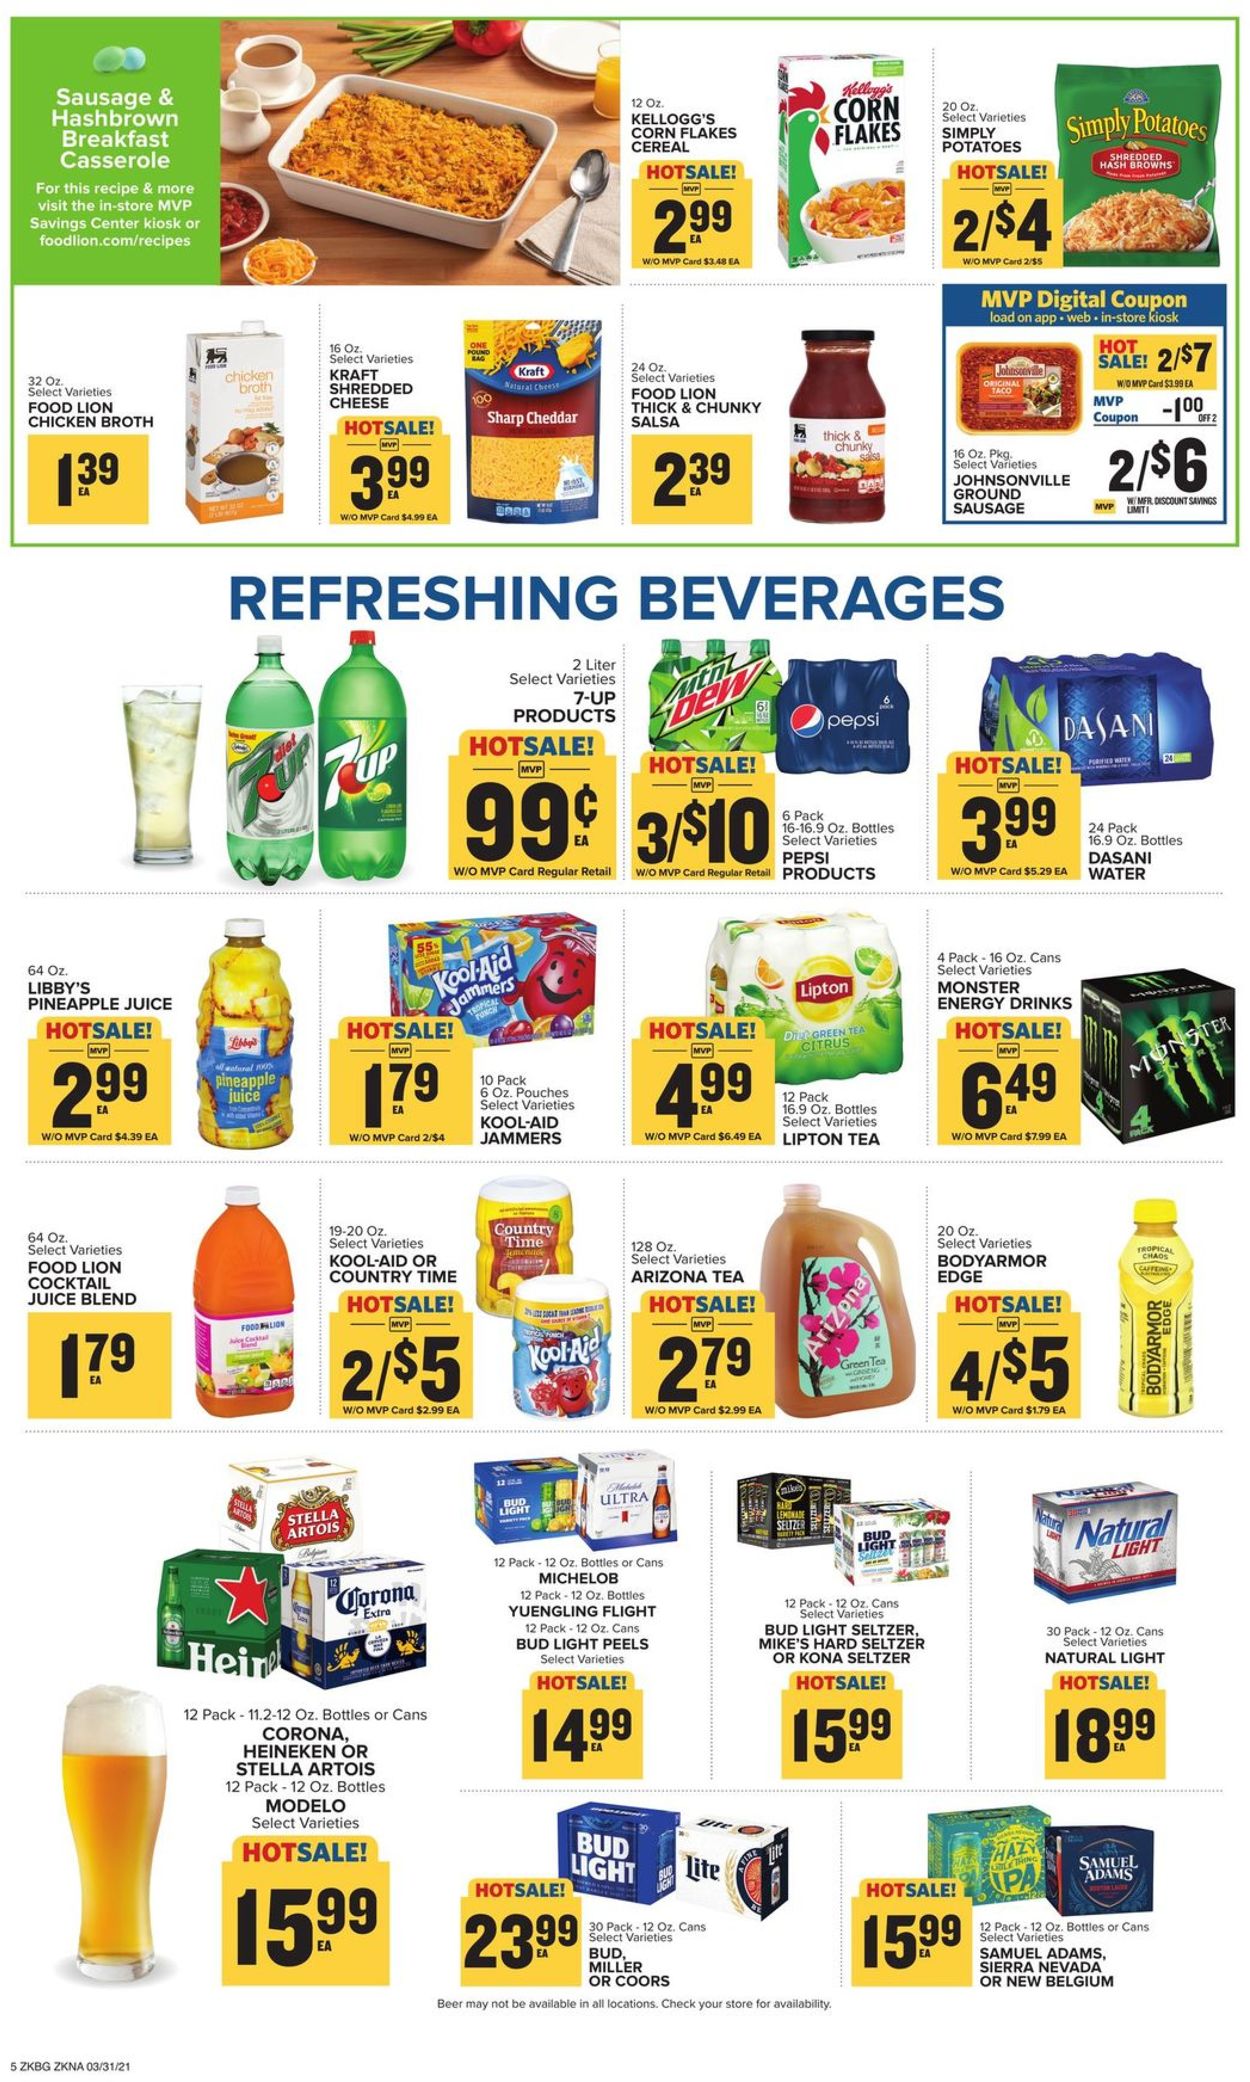 Food Lion Easter 2021 ad Current weekly ad 03/31 04/06/2021 [7